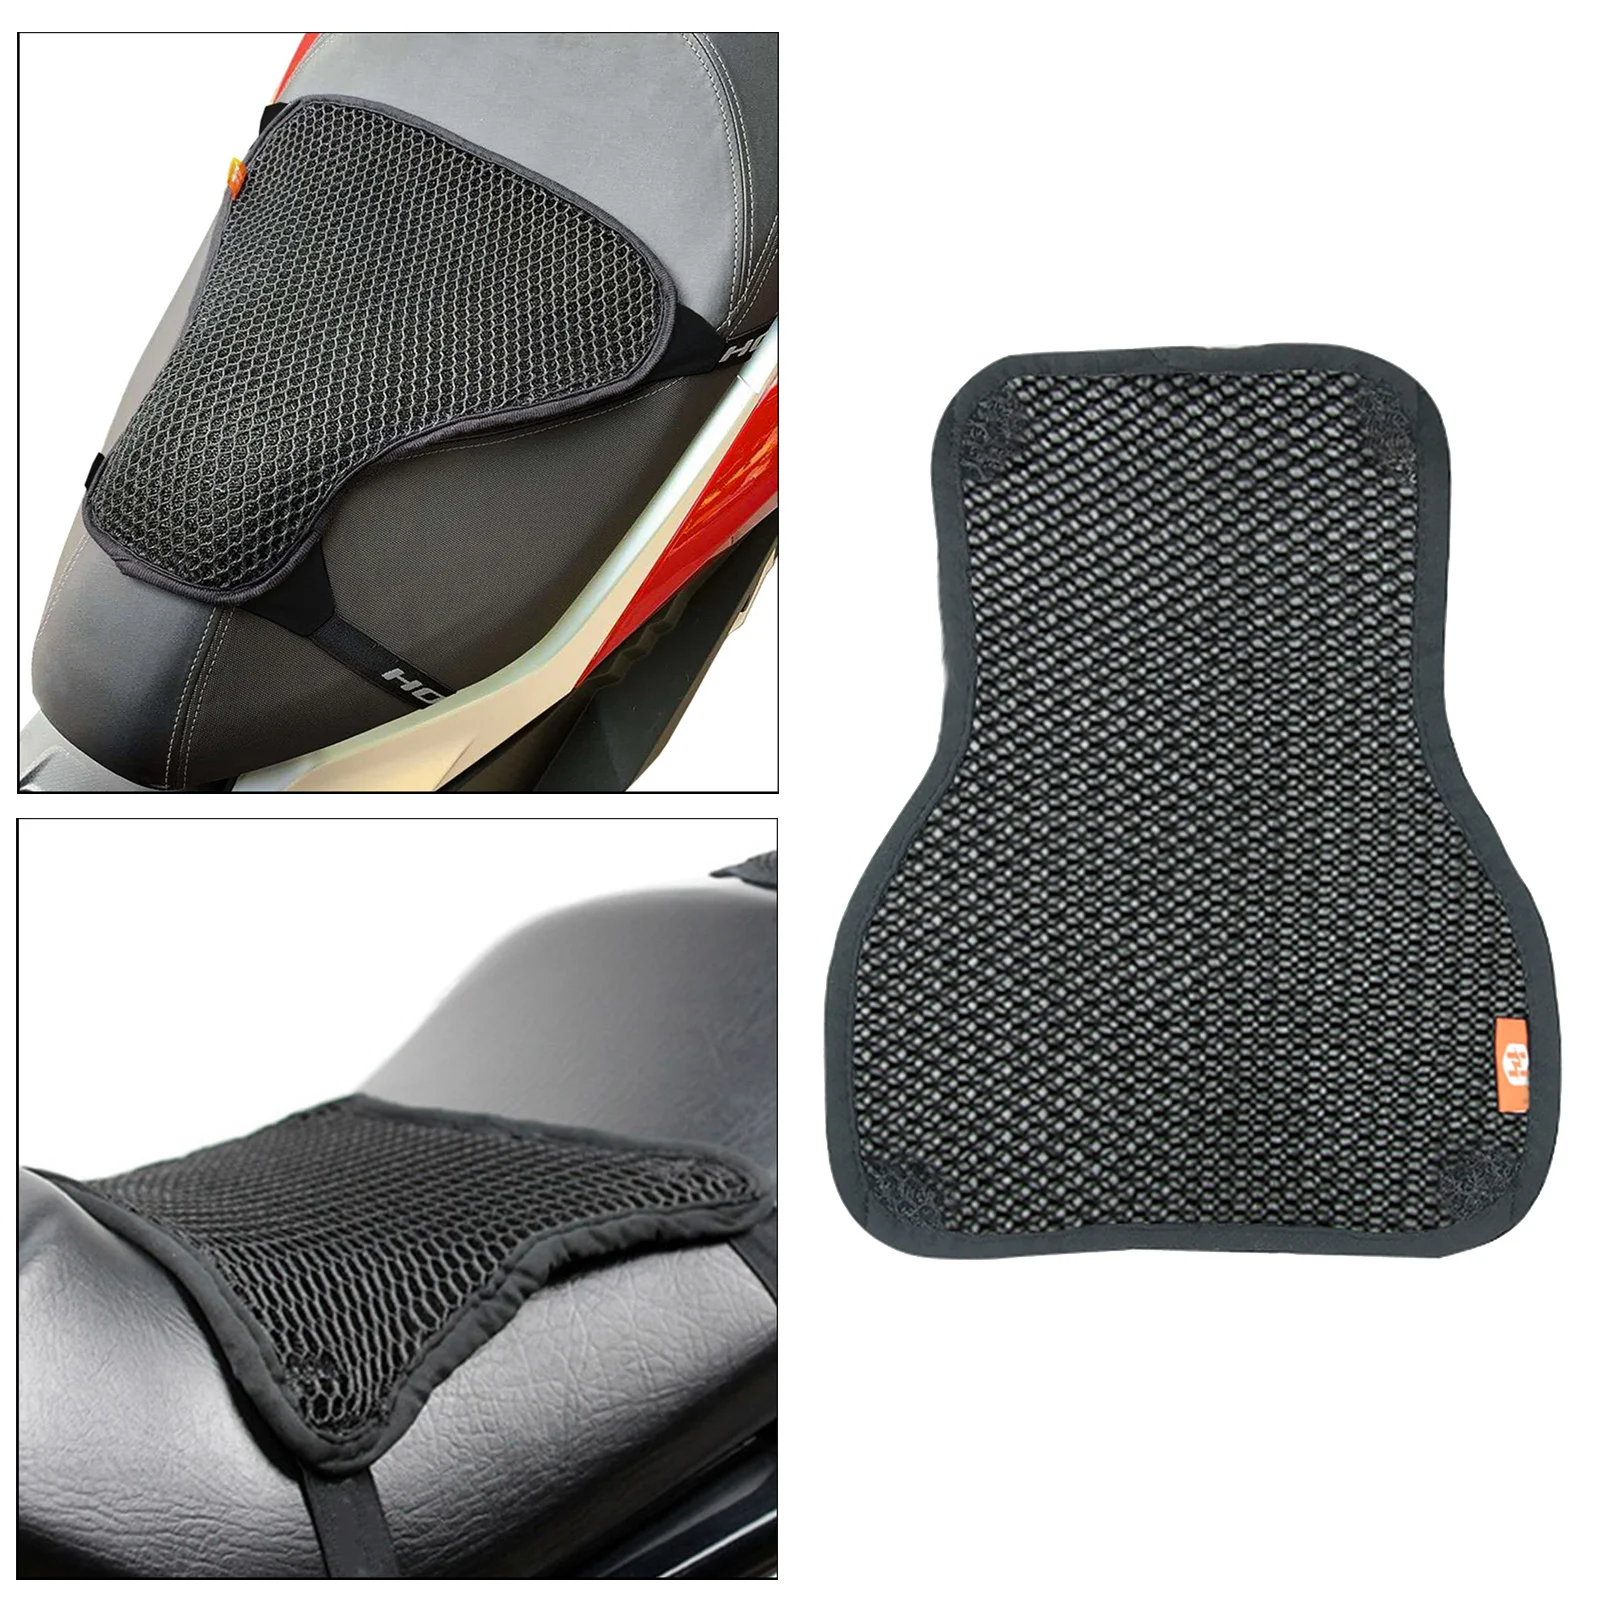 Motorcycle Seat Cushion Pad Breathable Cover Makes Long Rides More Comfortable and safe